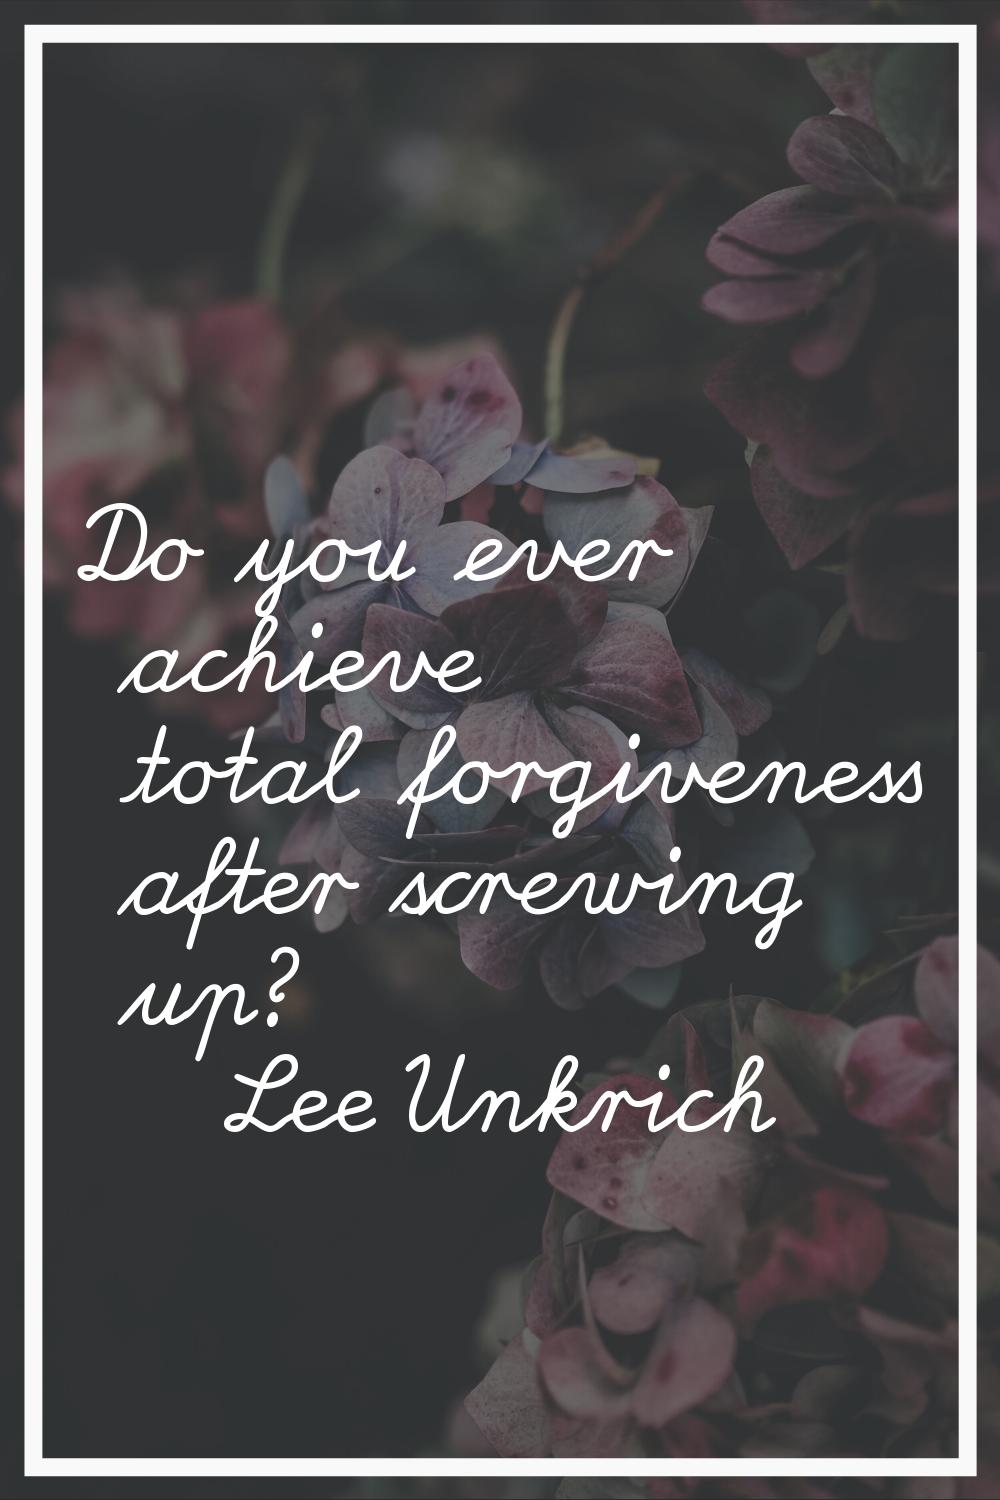 Do you ever achieve total forgiveness after screwing up?